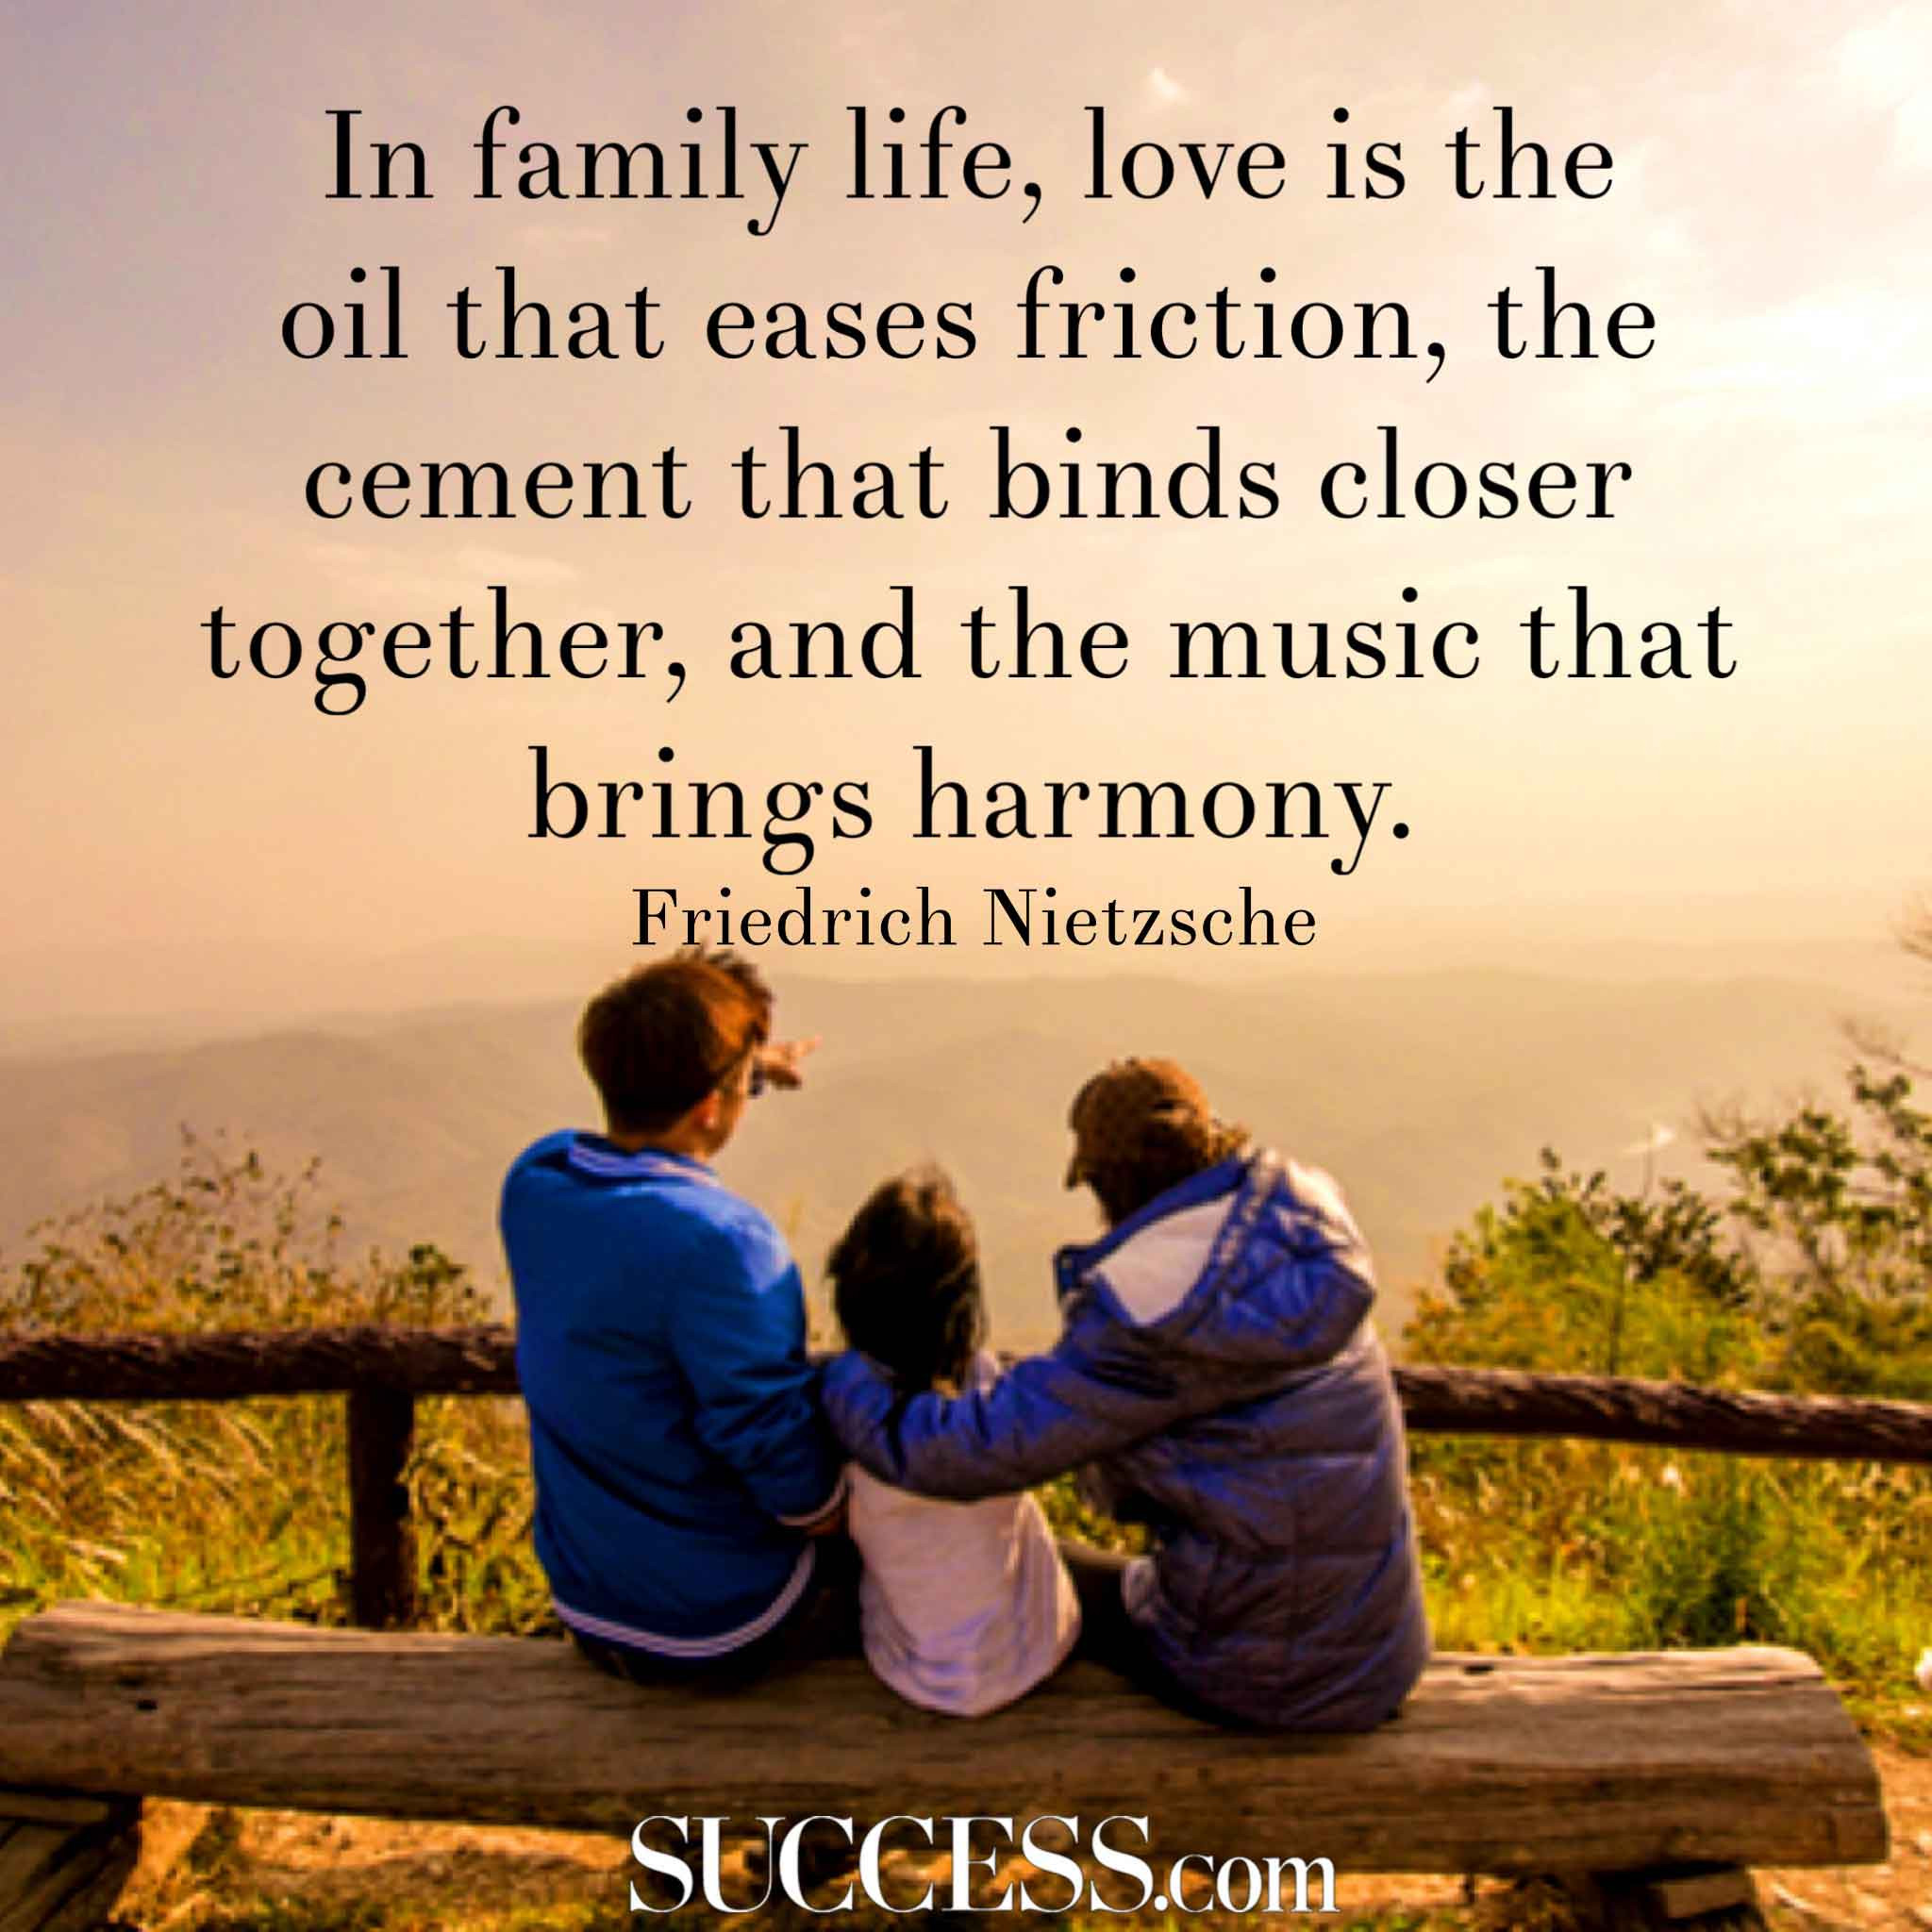 Family Together Quotes
 55 Most Beautiful Family Quotes And Sayings